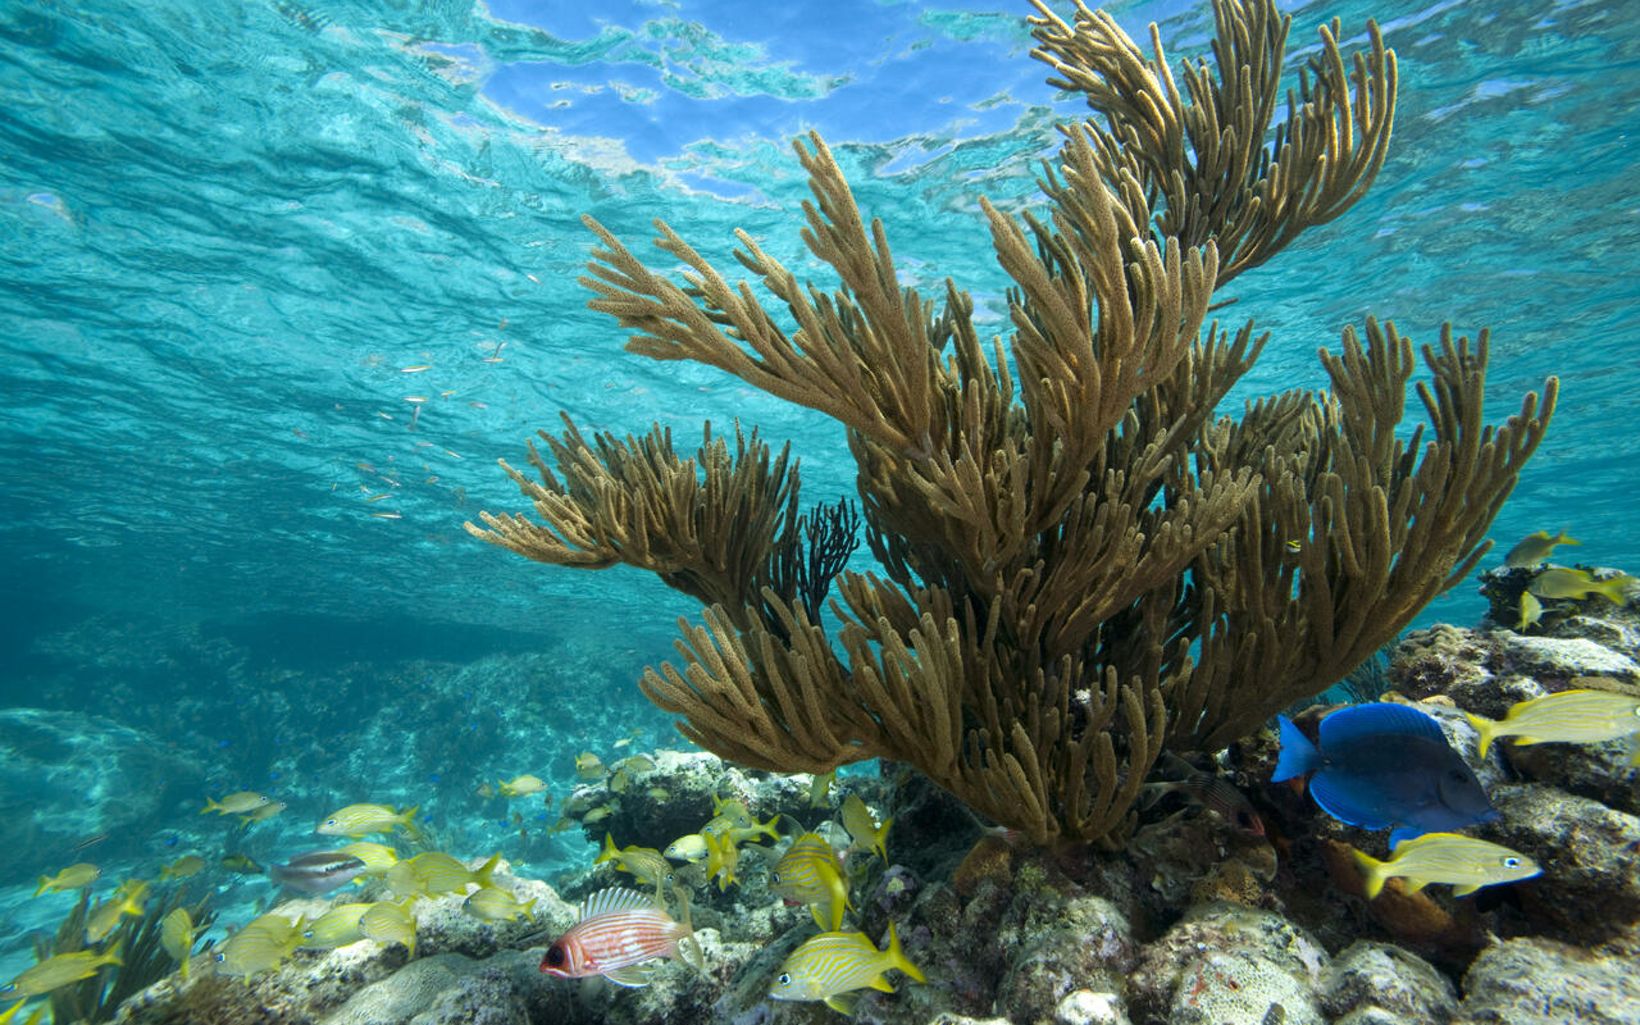 A variety of fish gather in the coral on a shallow reef.